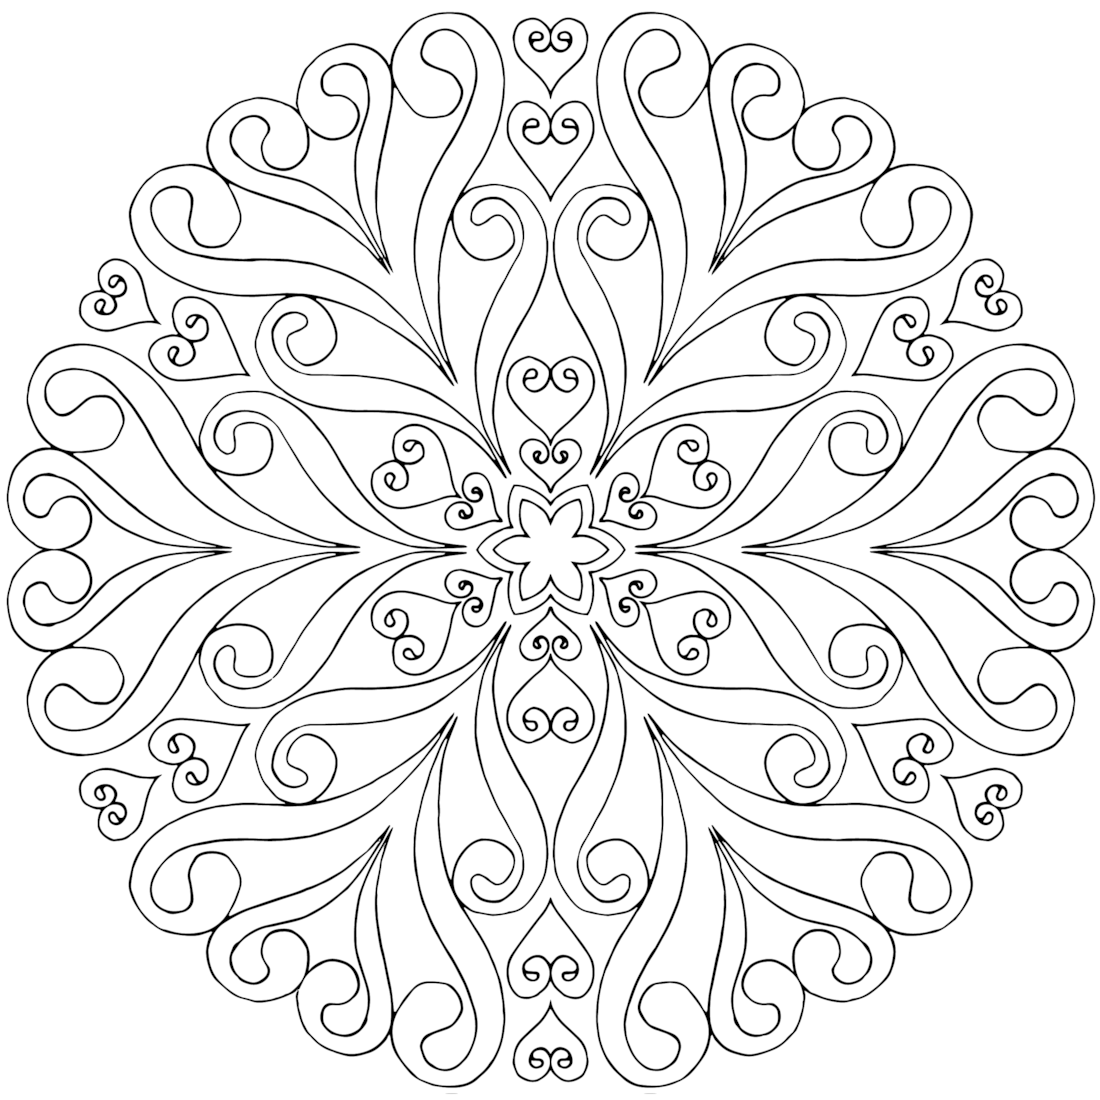 Download 40 Best Mandala Coloring Pages To Practice Your Focus - Visual Arts Ideas